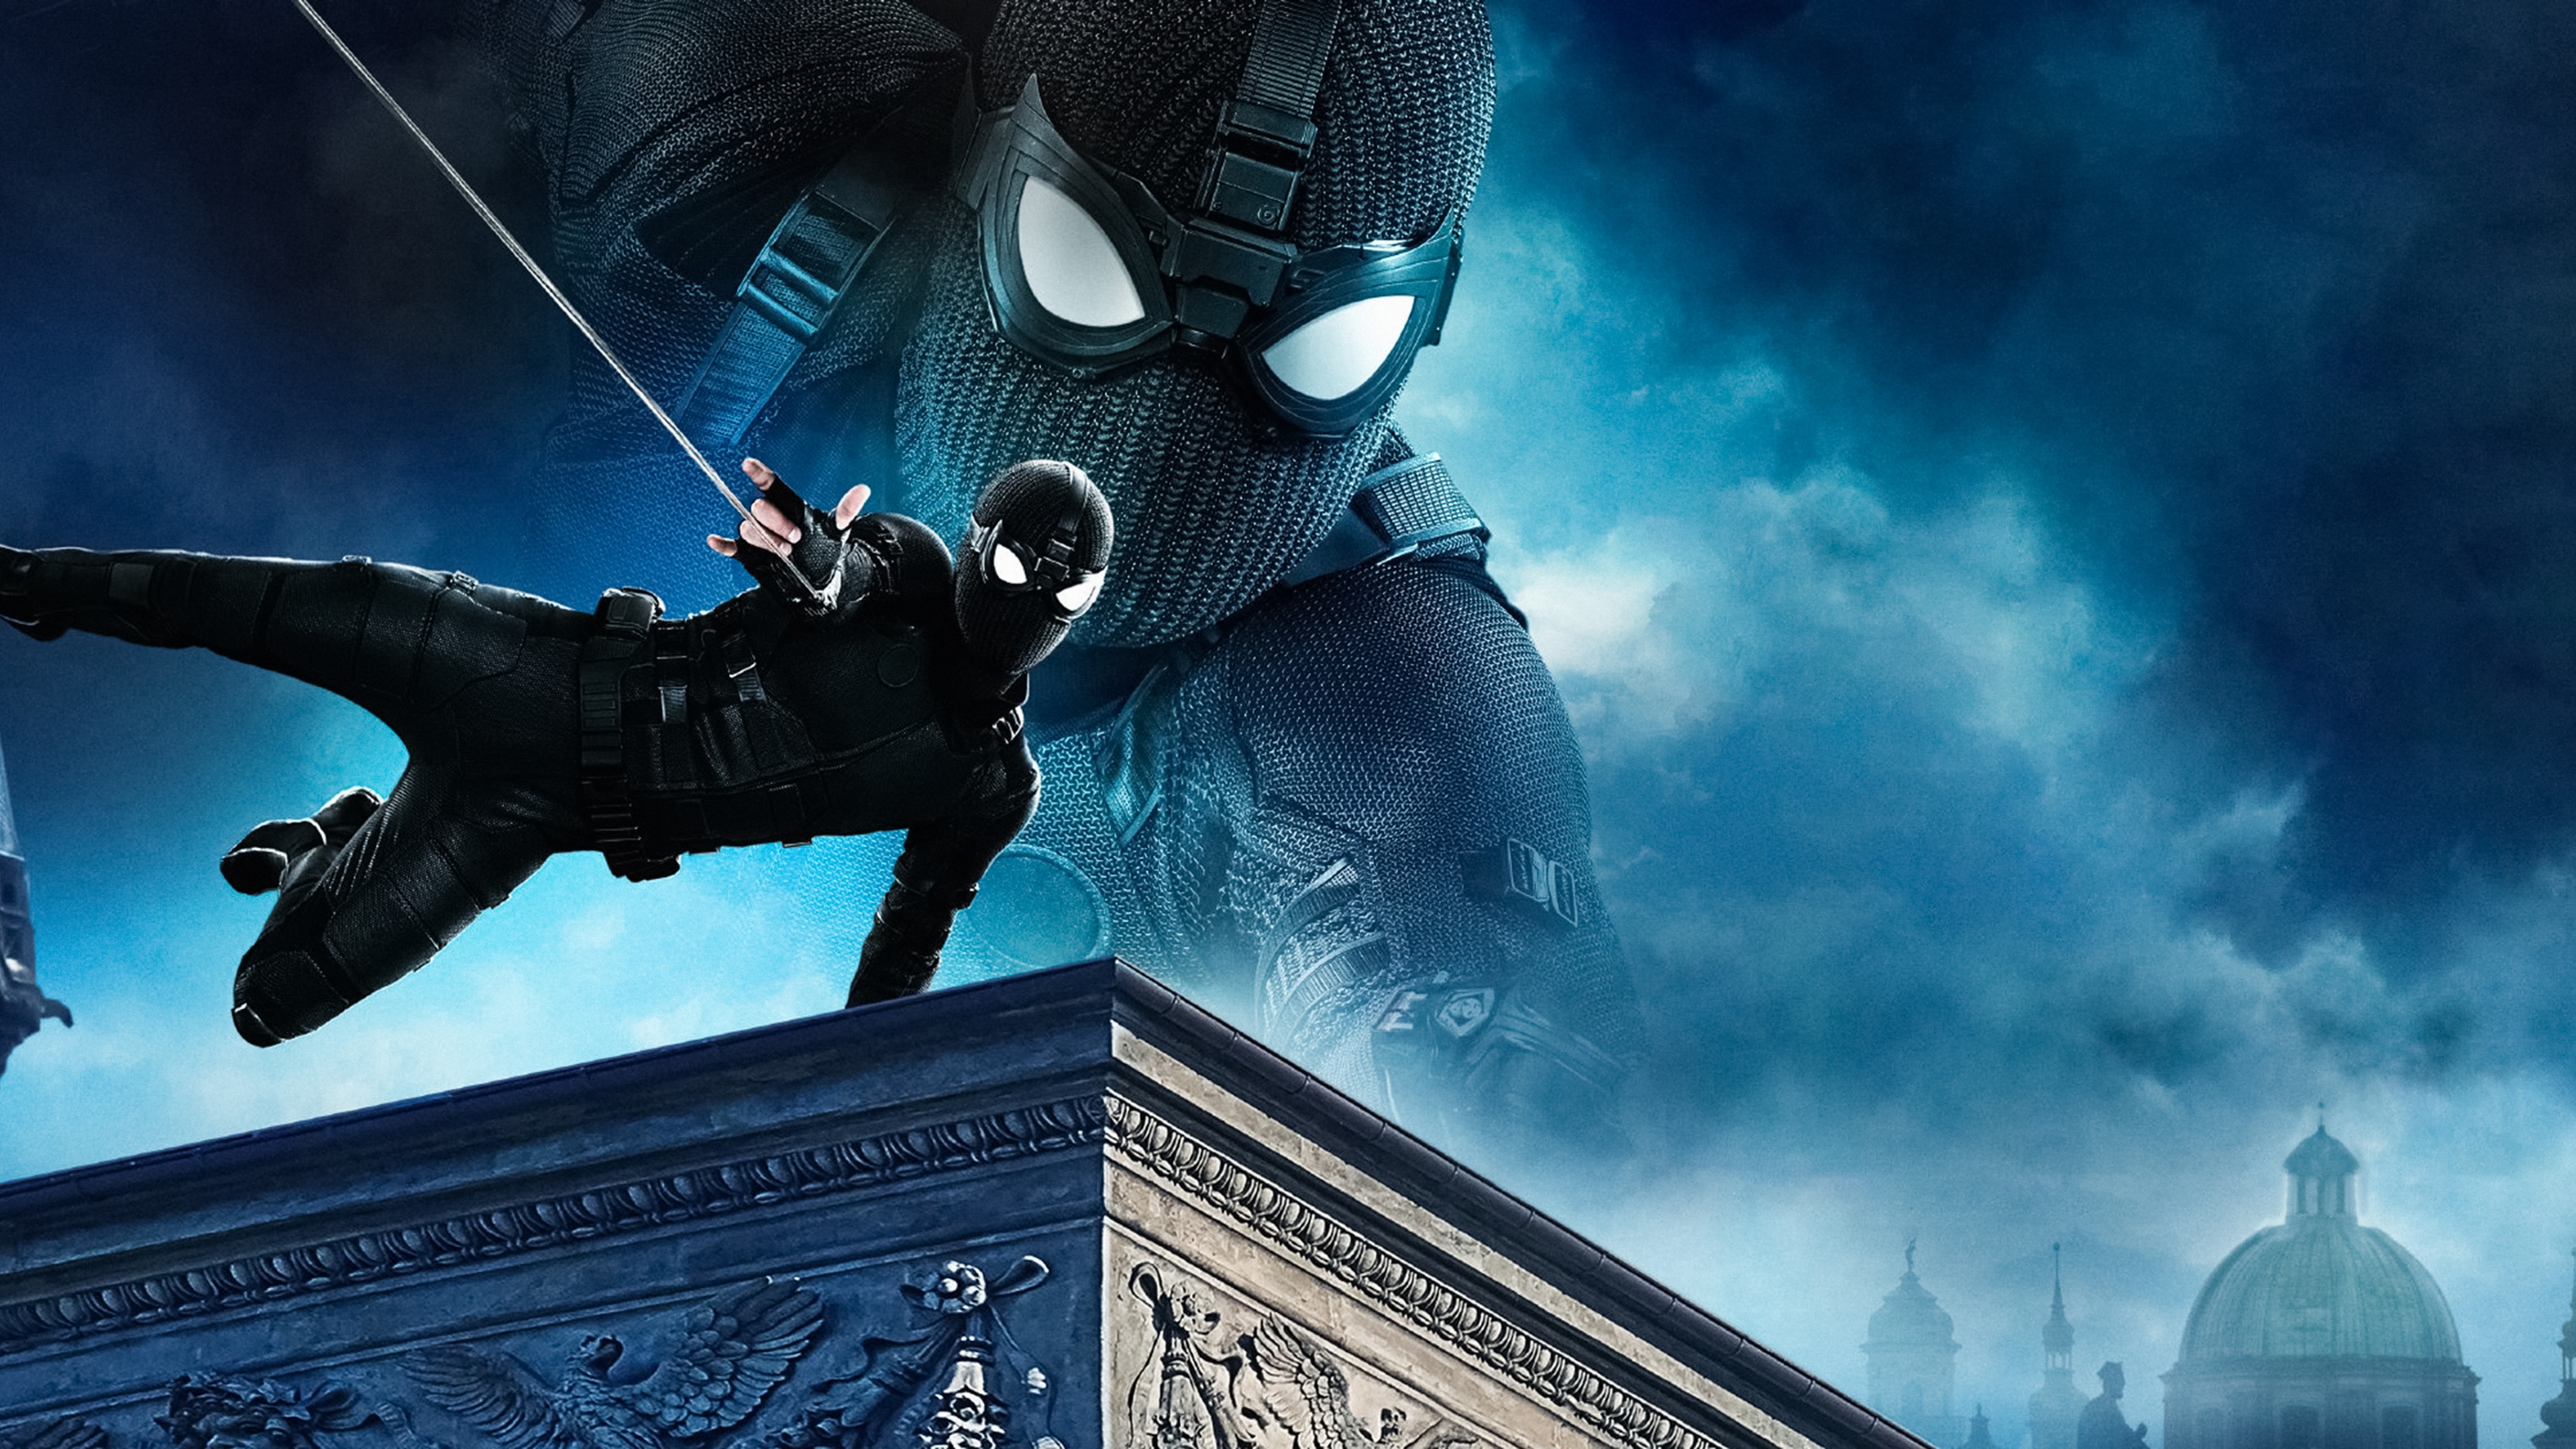 Spider-Man: Far From Home Wallpaper 4K, Night Monkey, Movies, #888